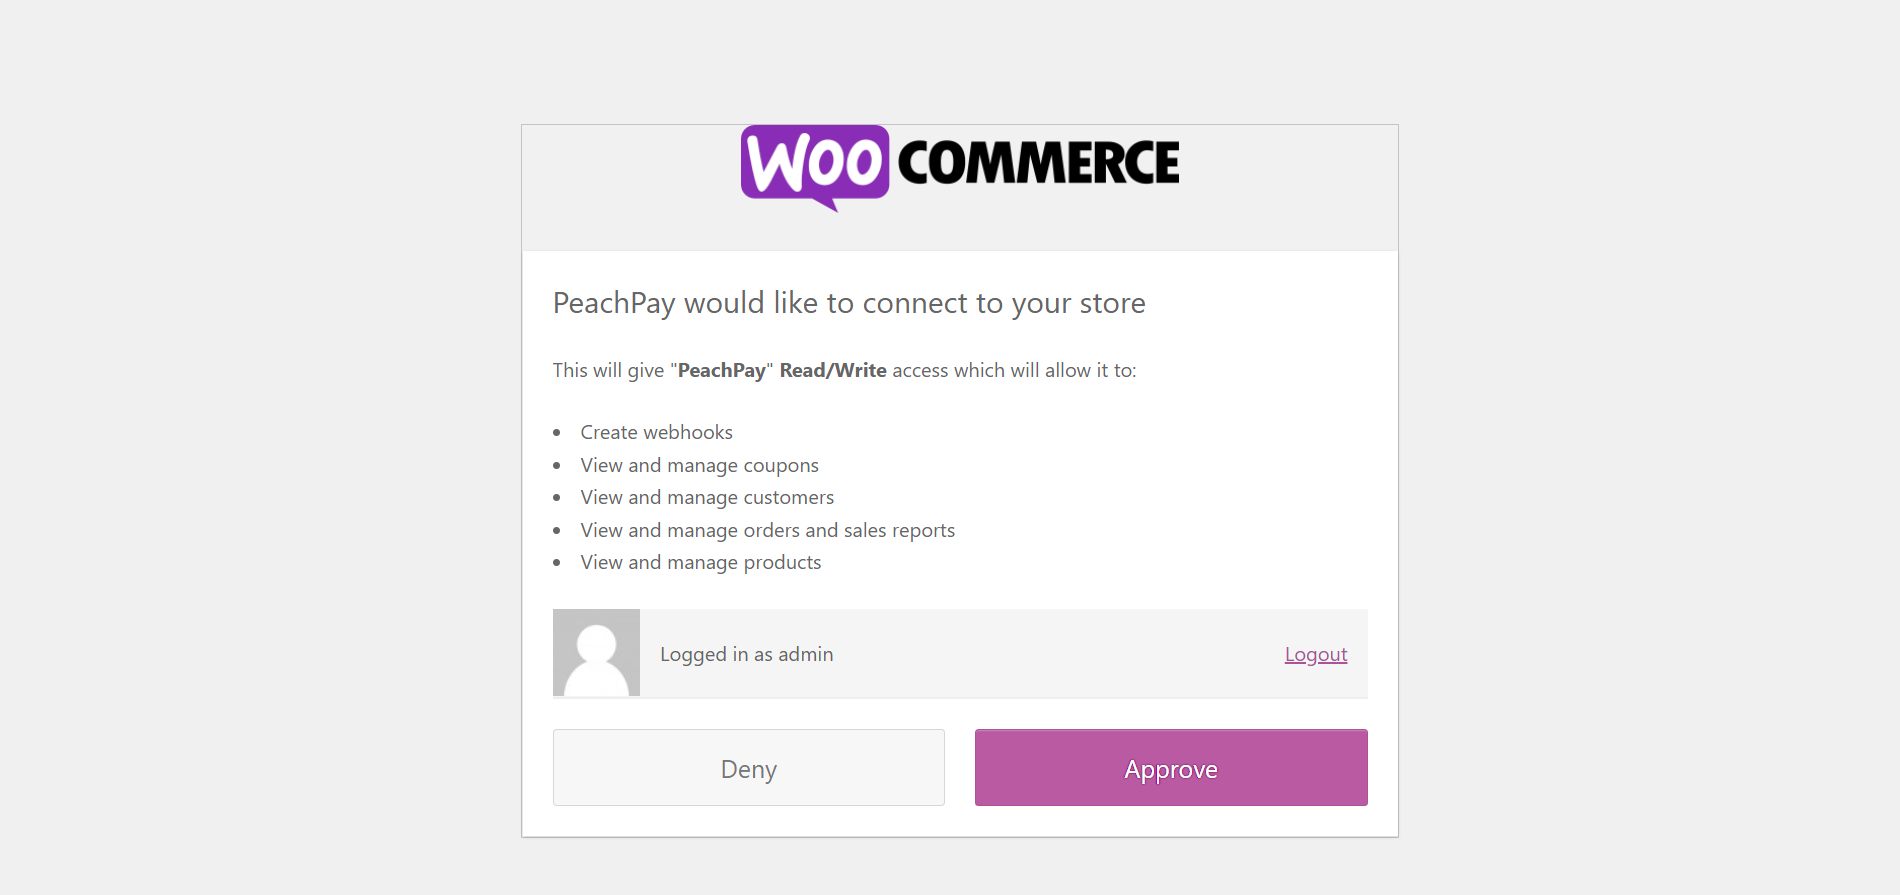 PeachPay would like to connect to your store